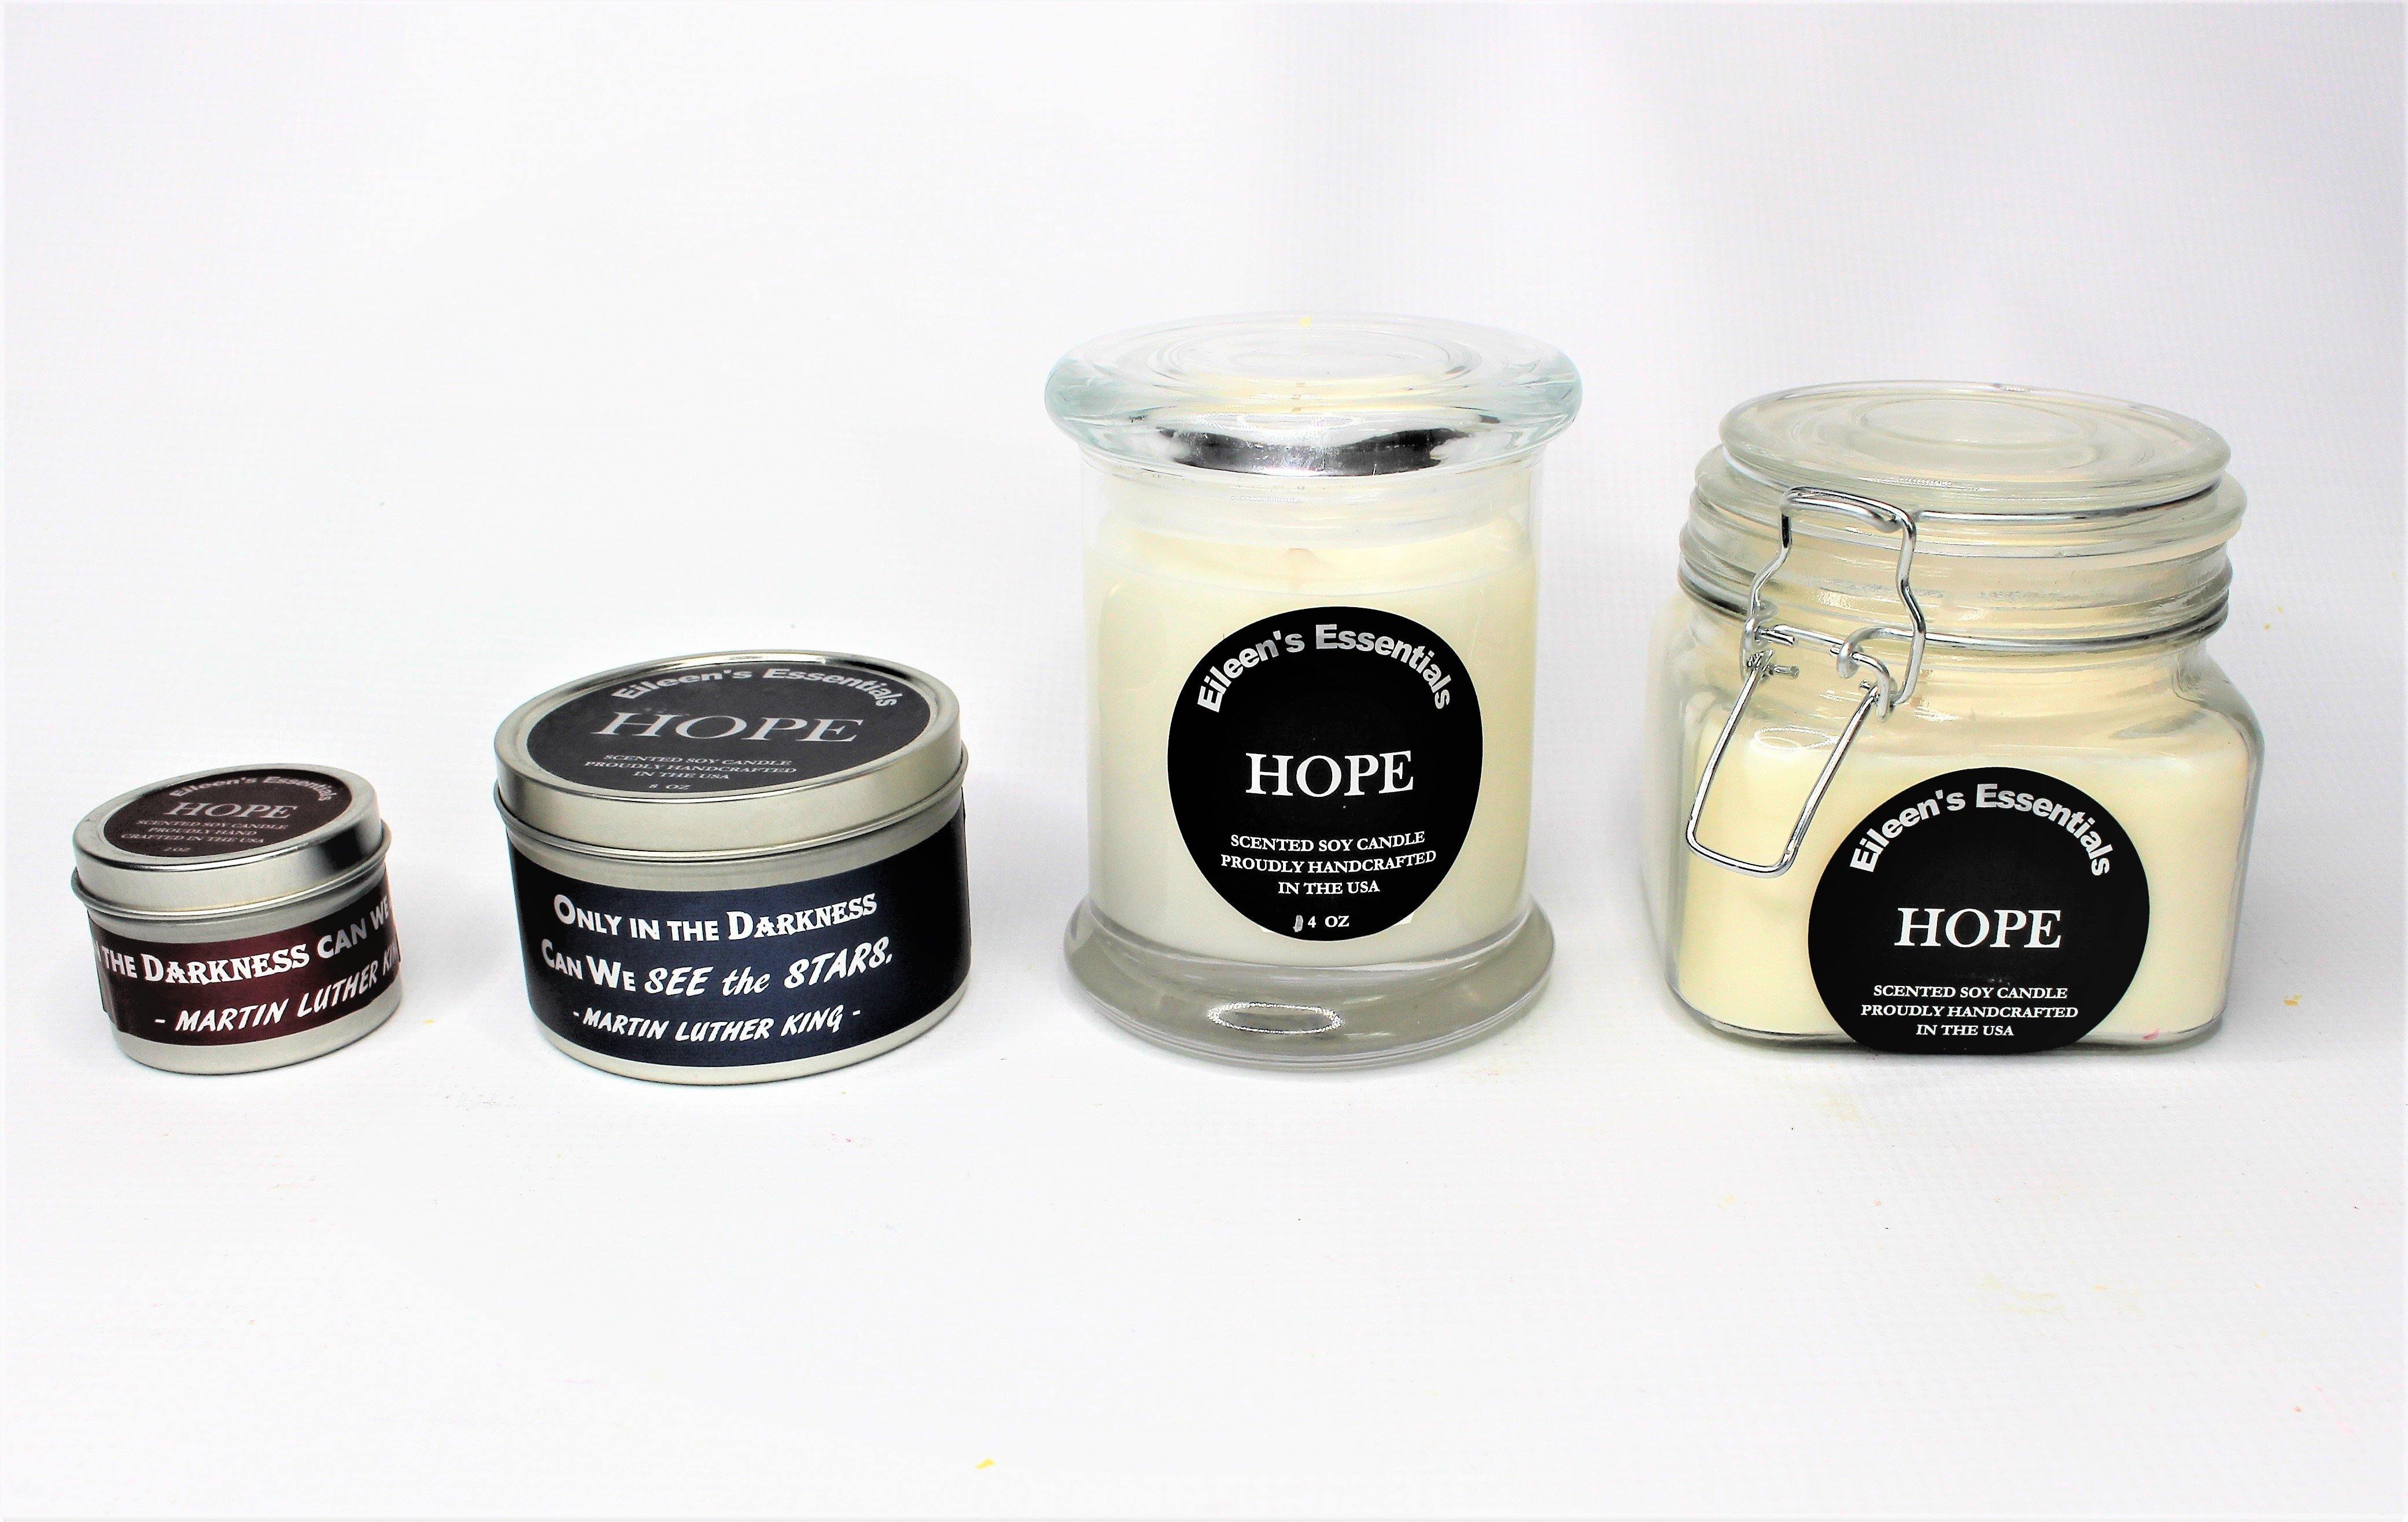 Inspirational Glass Candle; HOPE - Eileen's Essentials